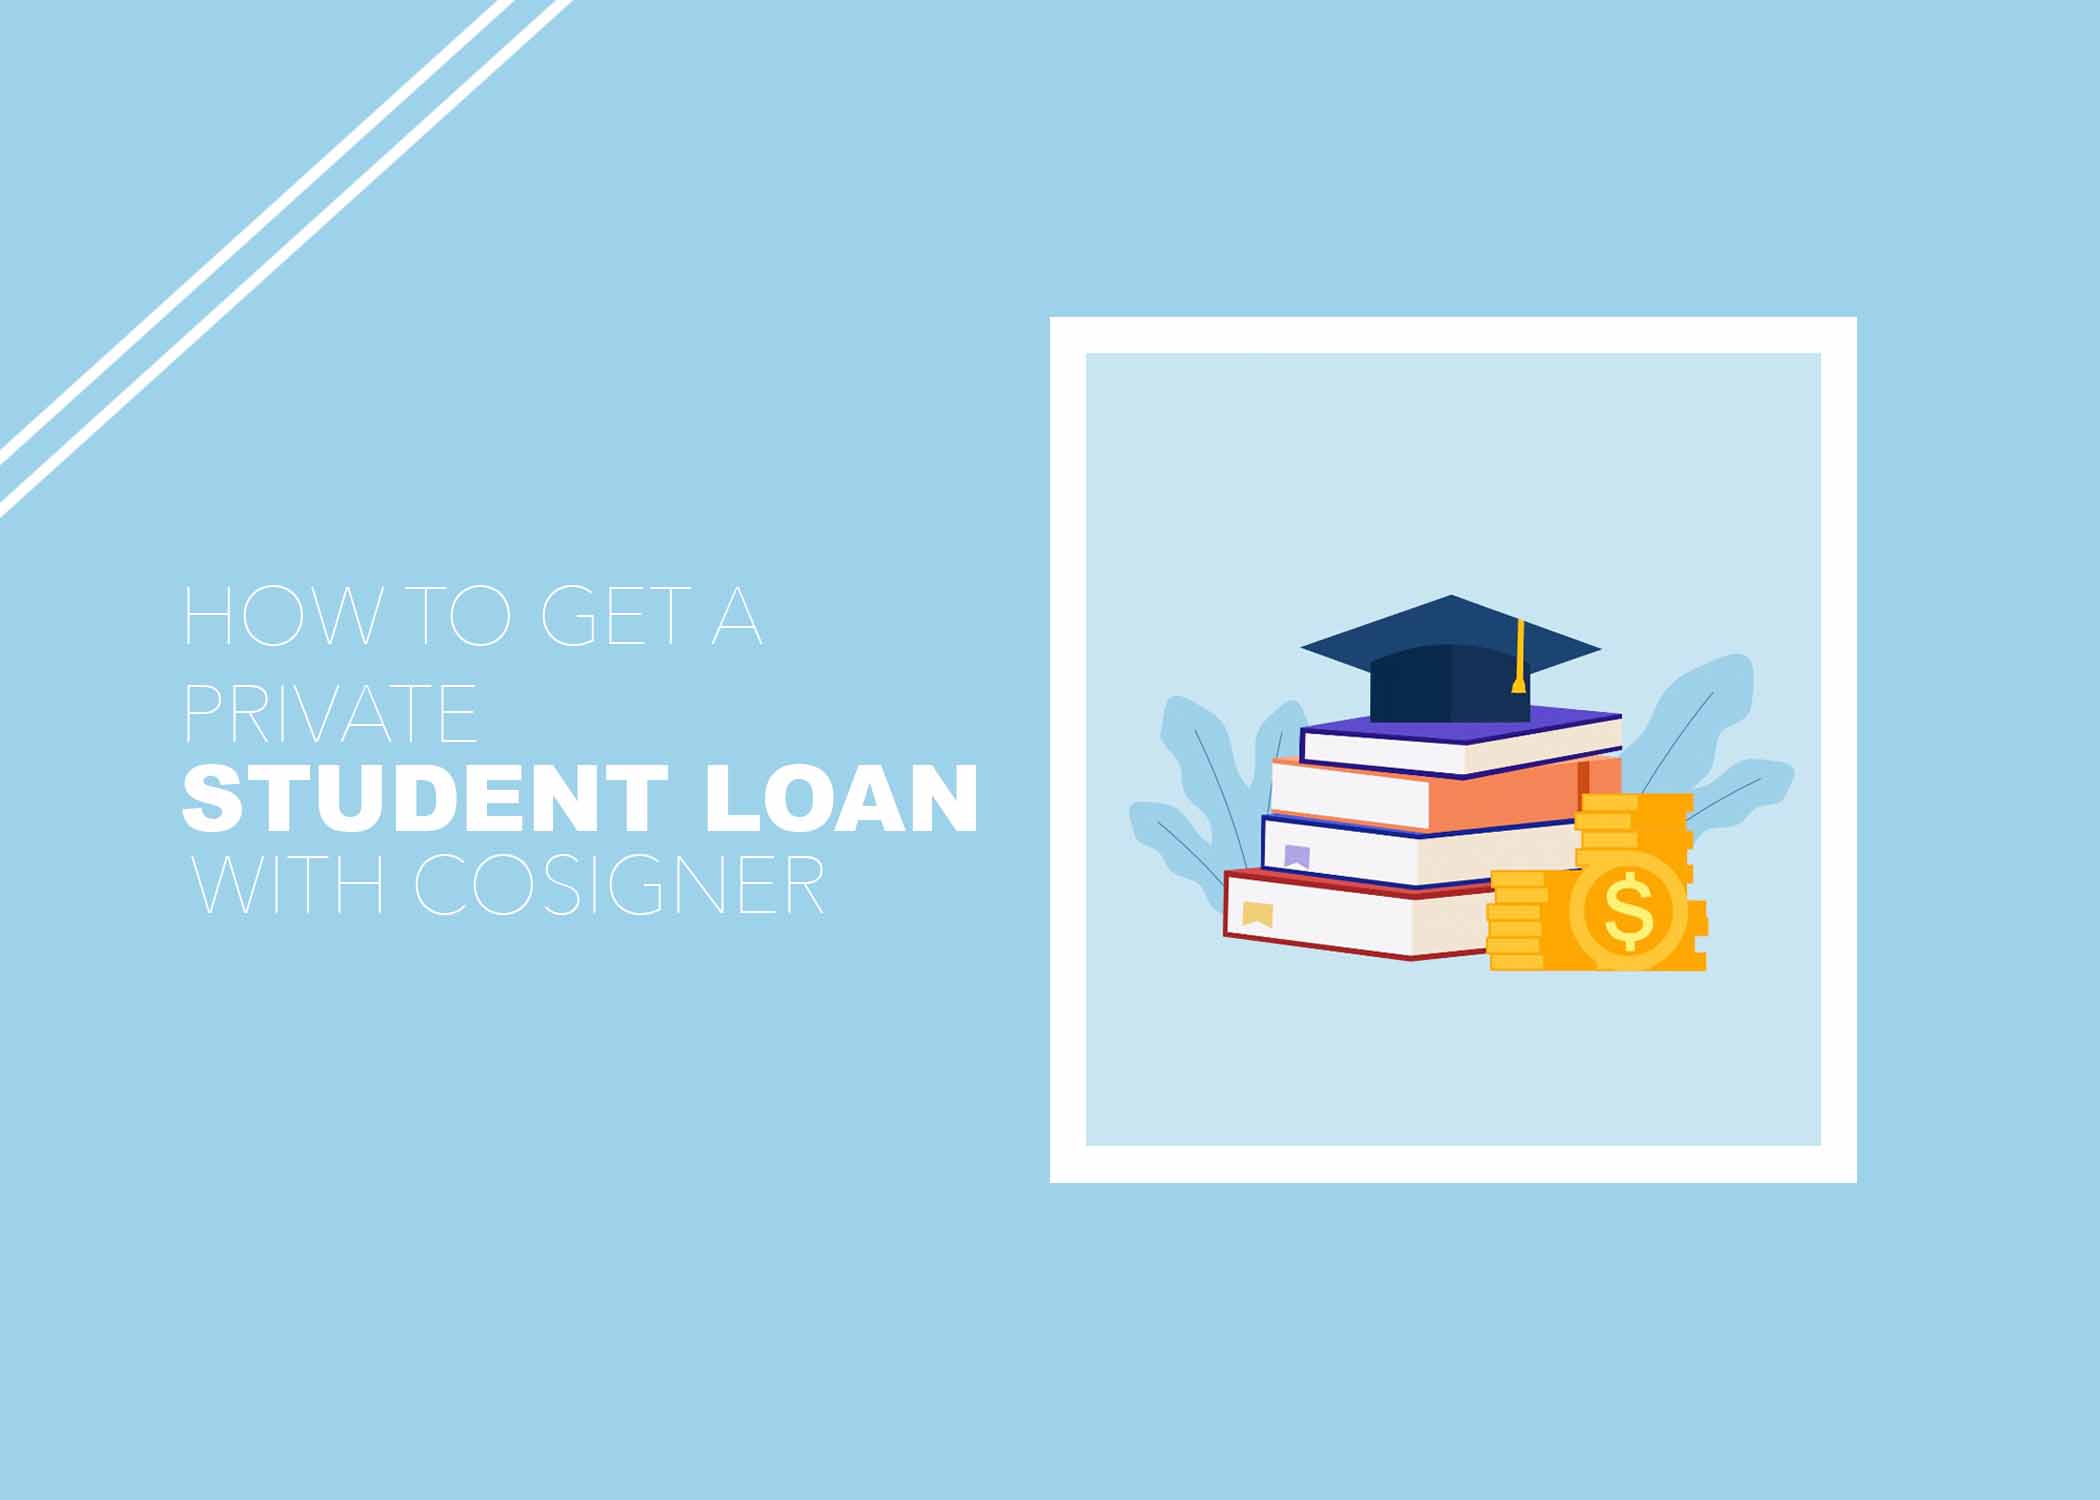 How to Get a Private Student Loan Without Cosigner